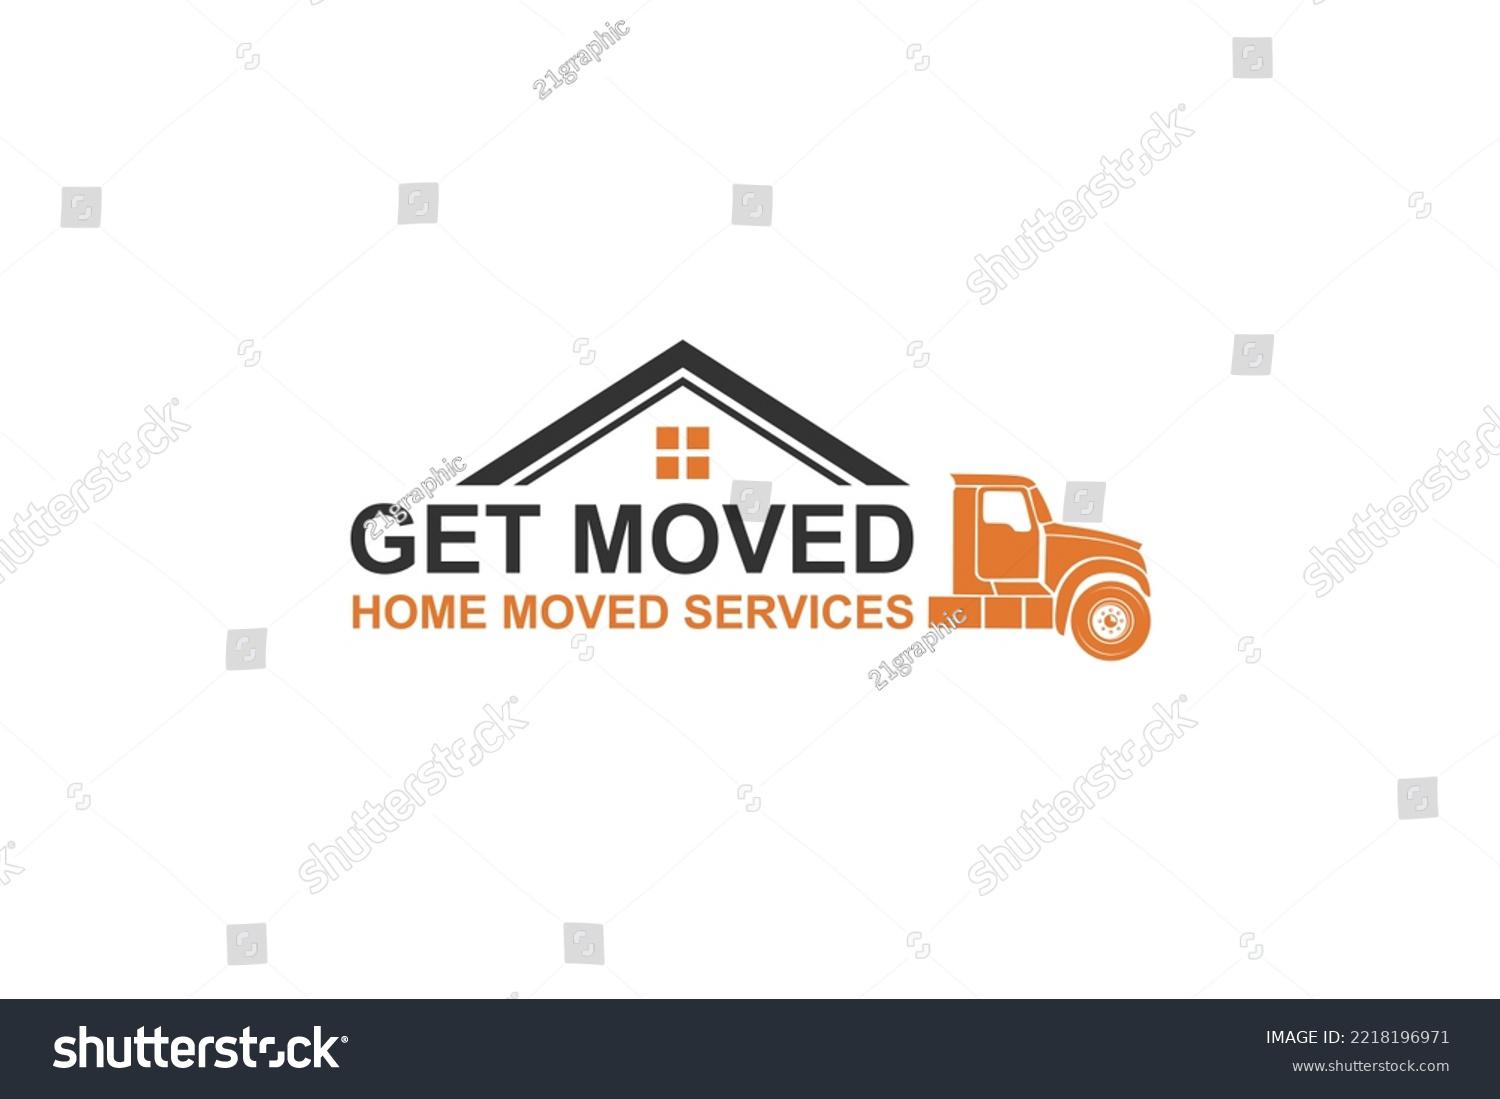 Room to Room Removals -logo